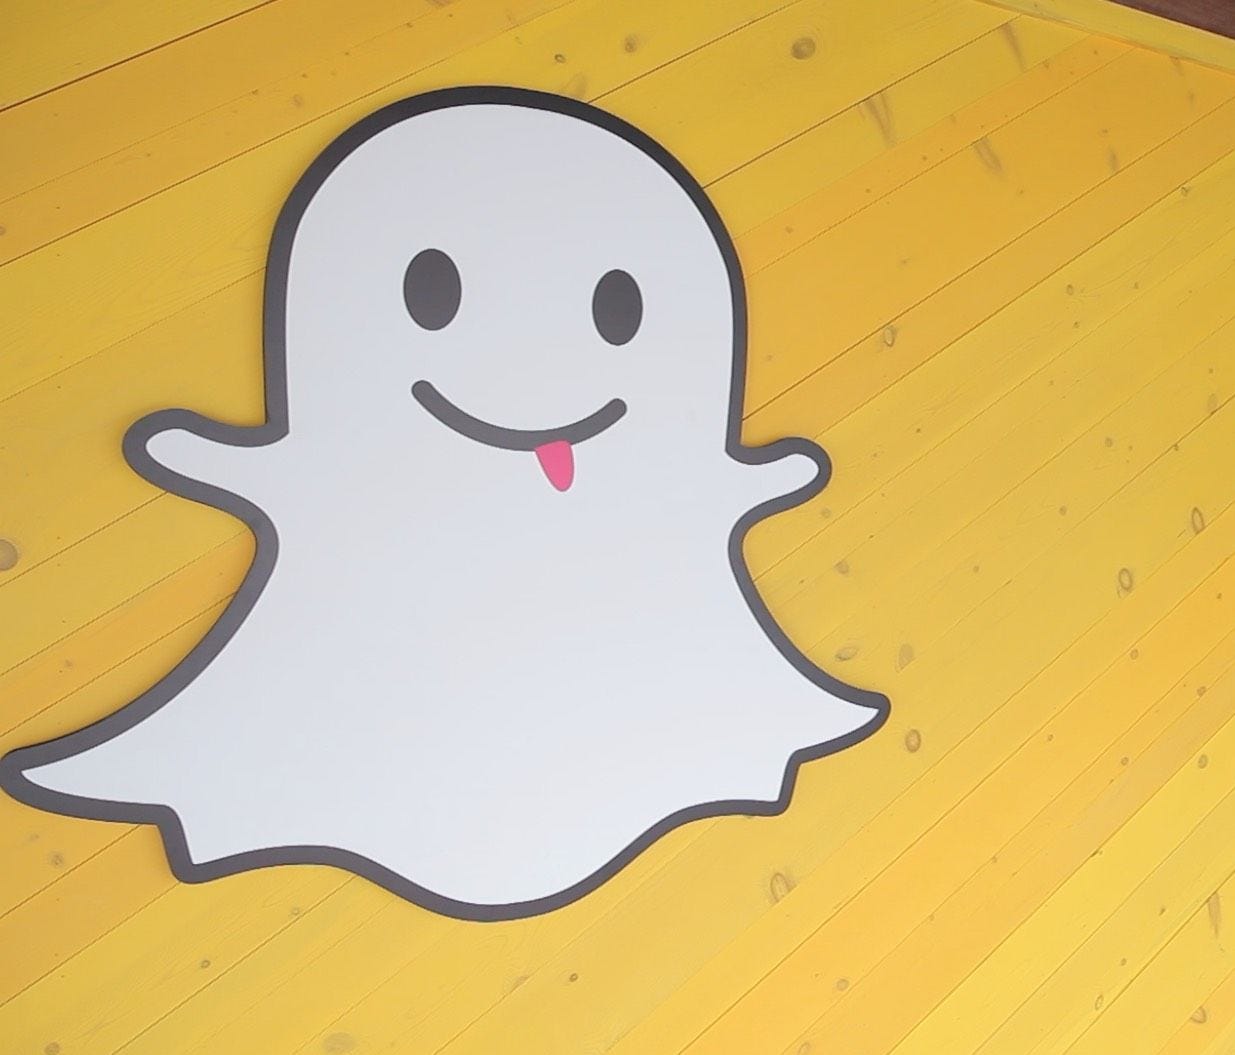 The Snapchat ghost on the wall of the old Snapchat beach house in Venice, Ca.